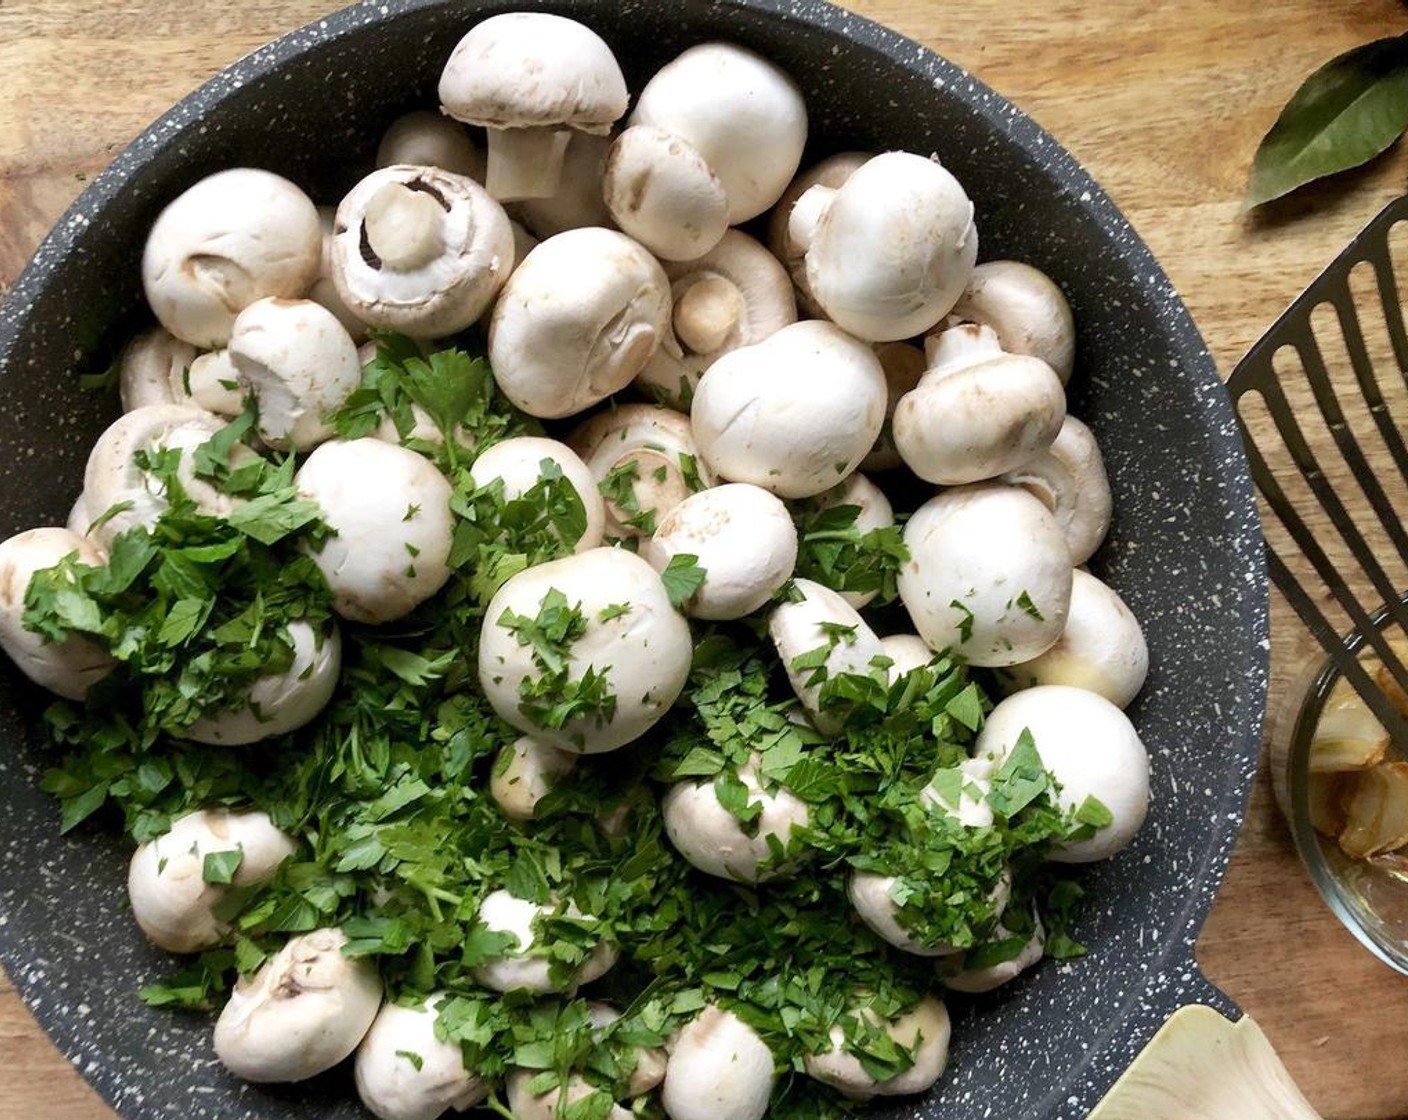 step 2 Increase heat to medium-high.  Add the Mushrooms (9 cups) and Fresh Parsley (1/2 cup). Sauté until the mushrooms turn a golden color for about 8 to 10 minutes.